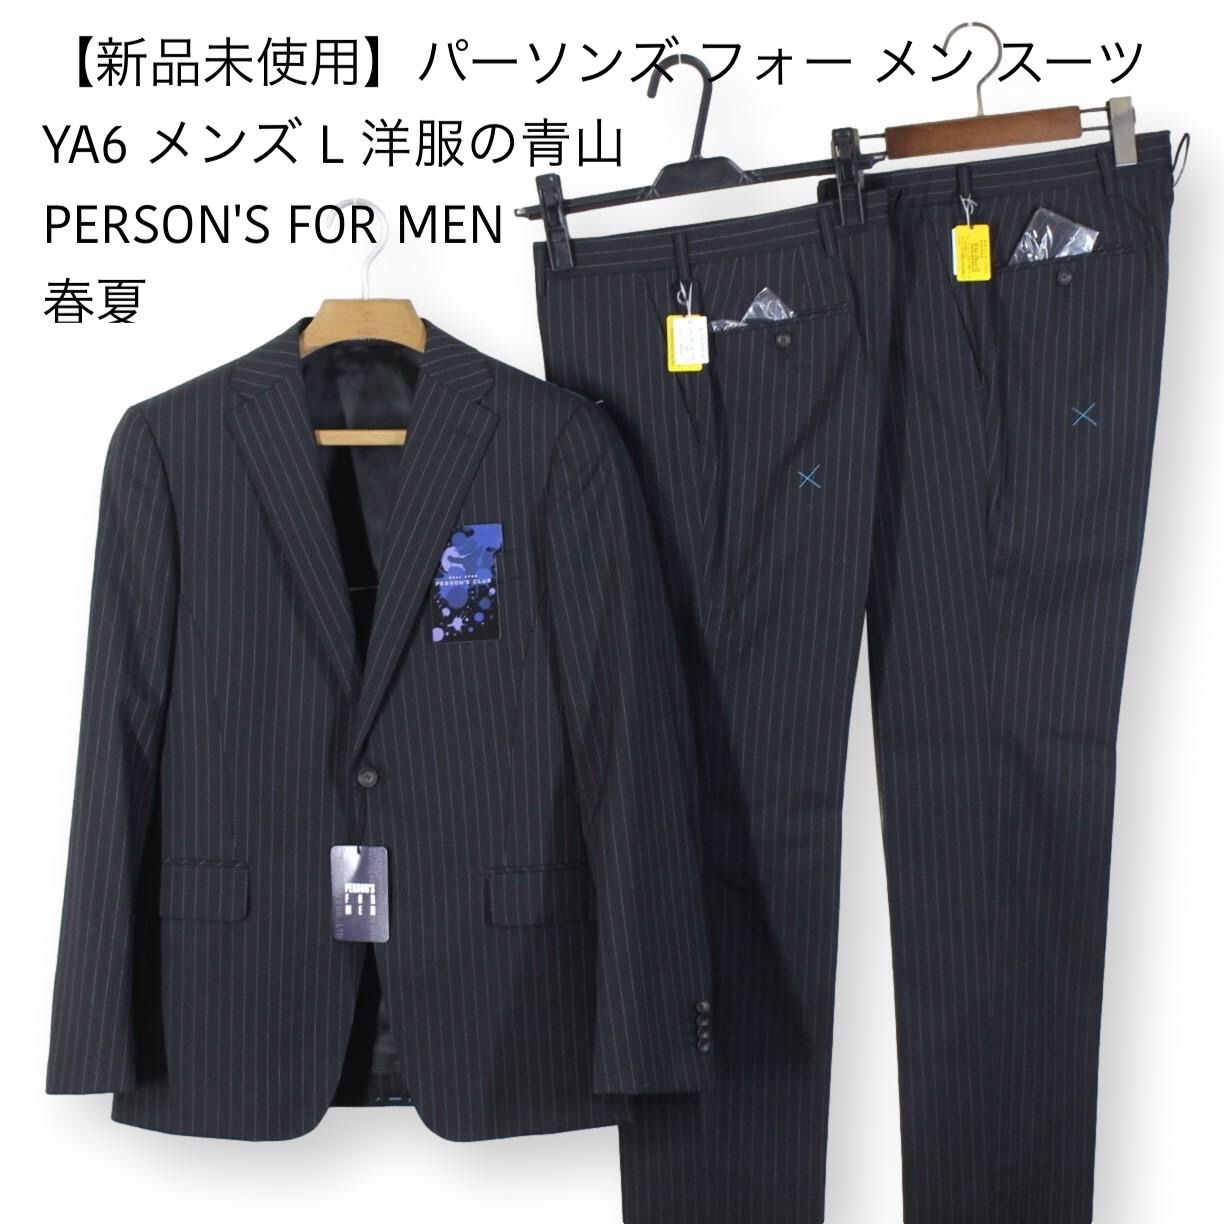 PERSON'S FOR MEN  黒